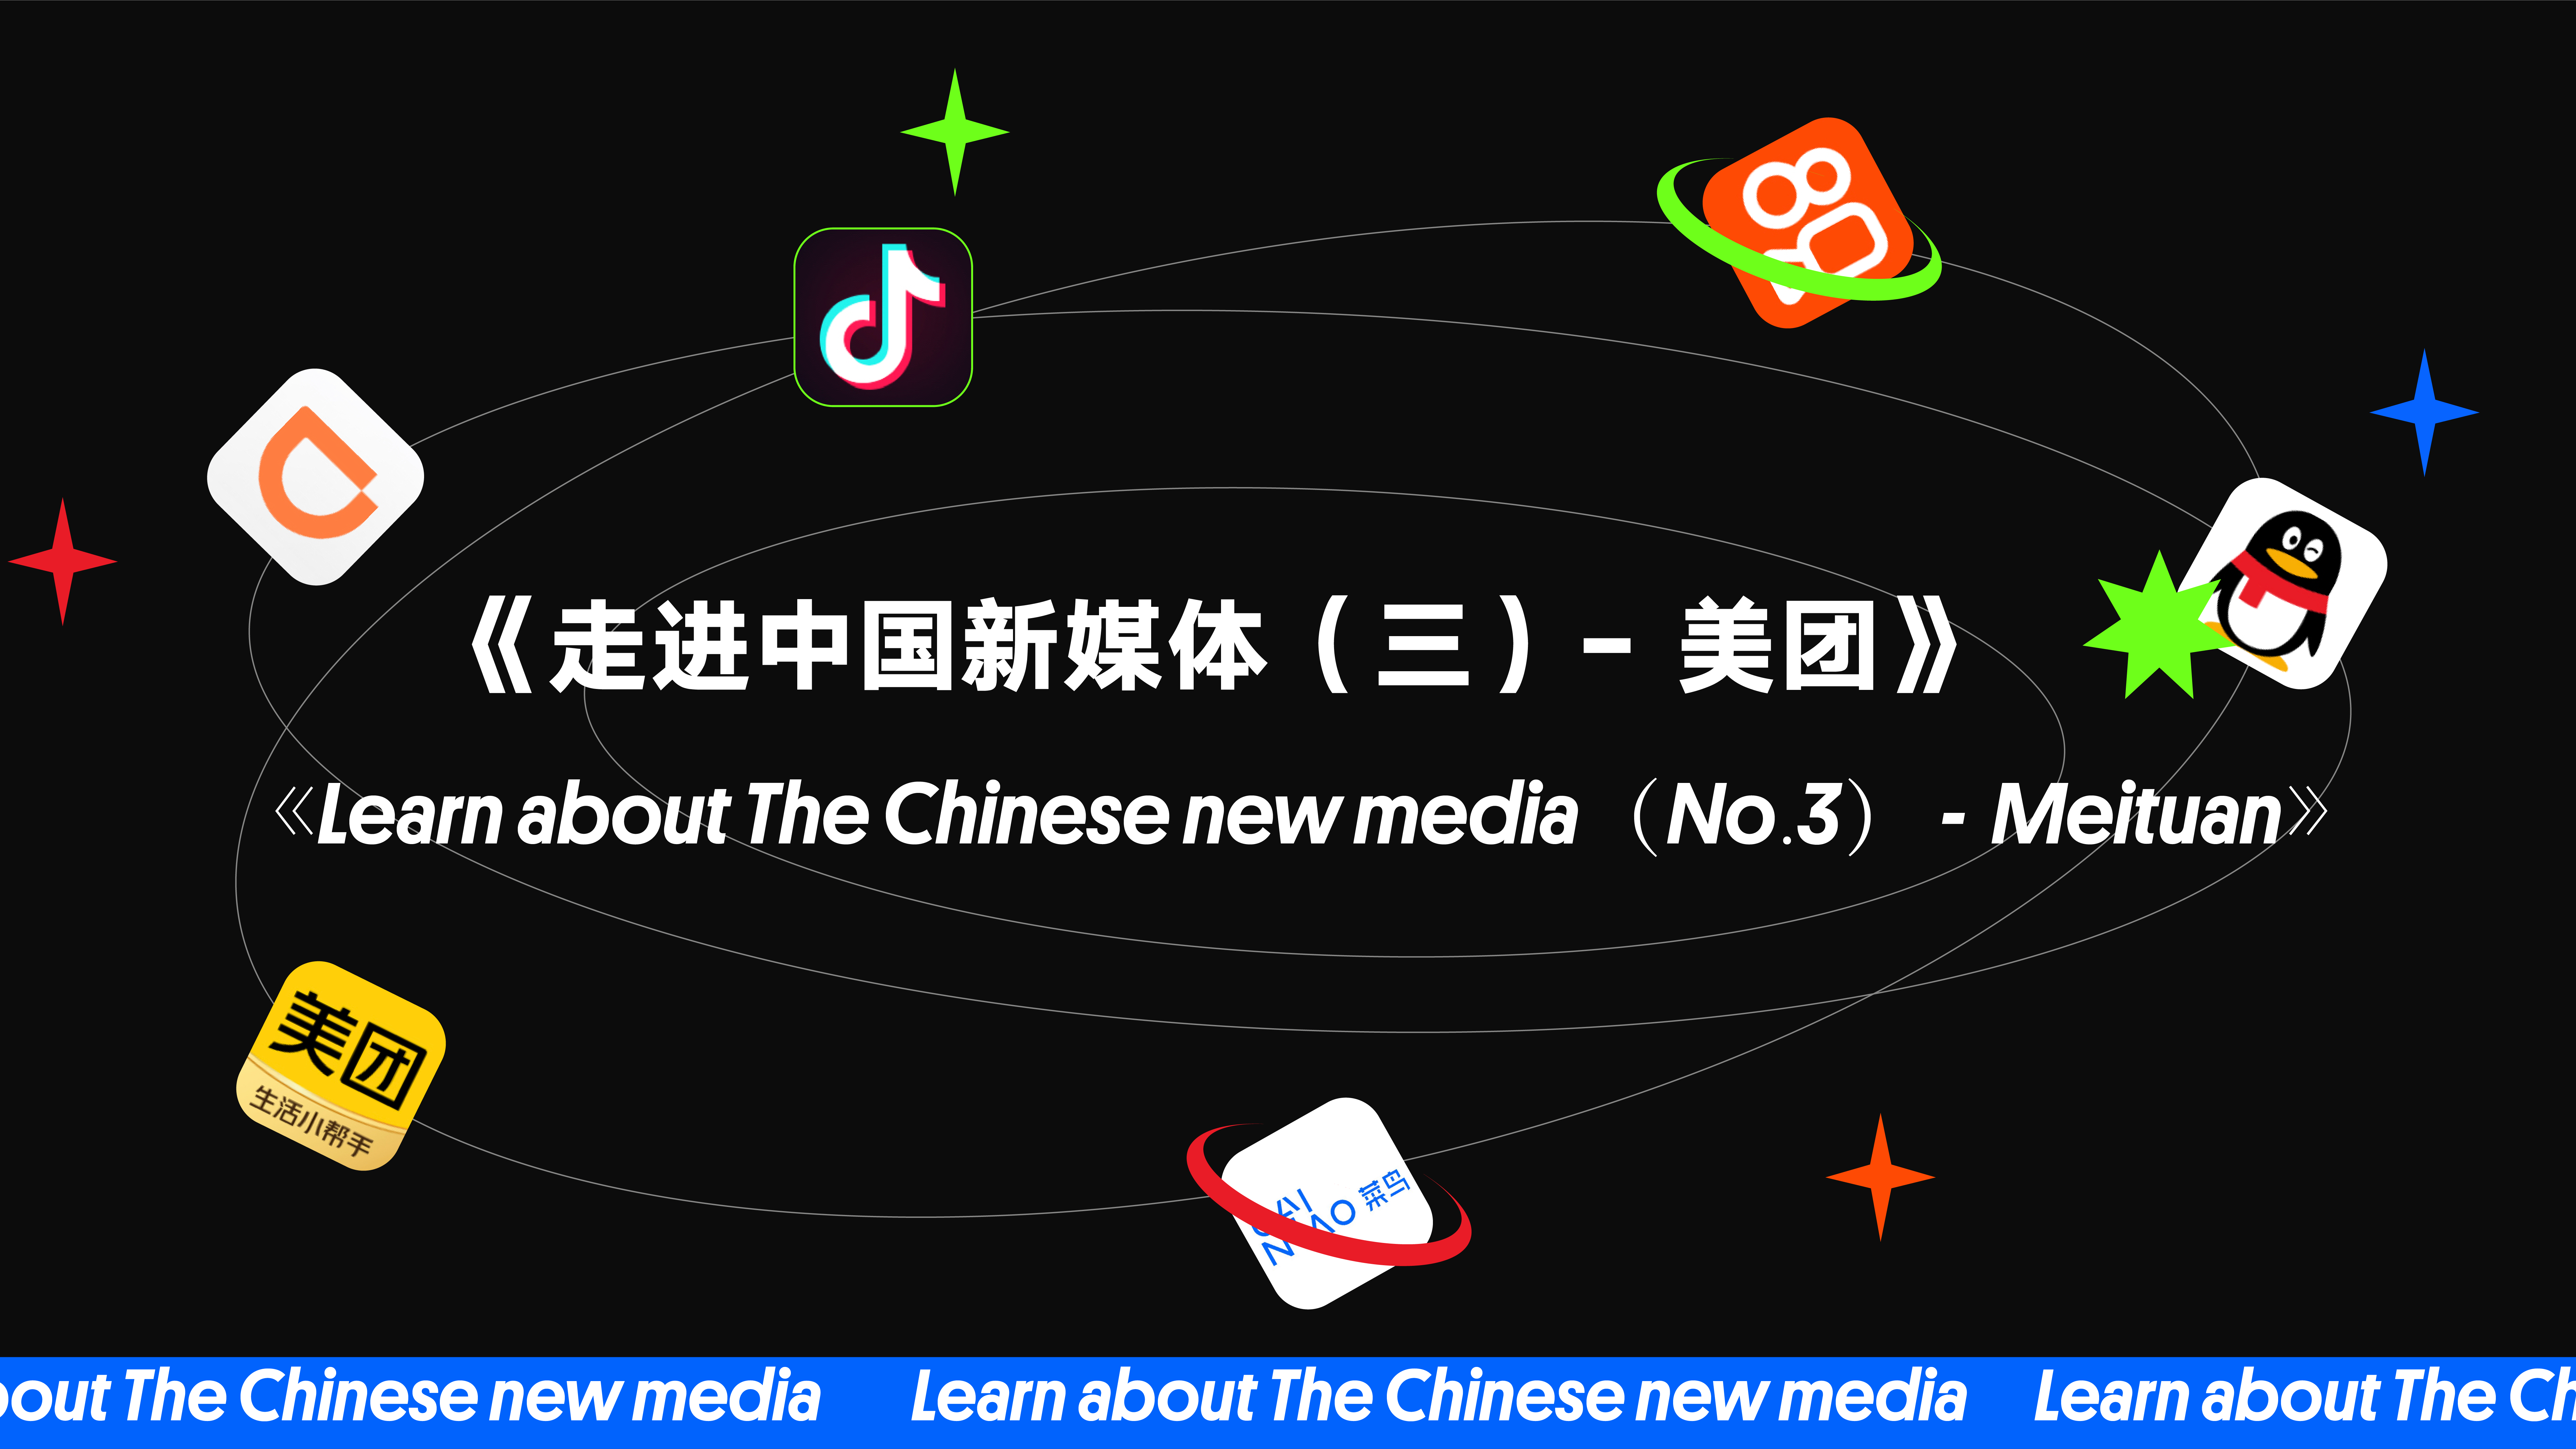 《Learn about The Chinese new media（No.3）—Meituan》